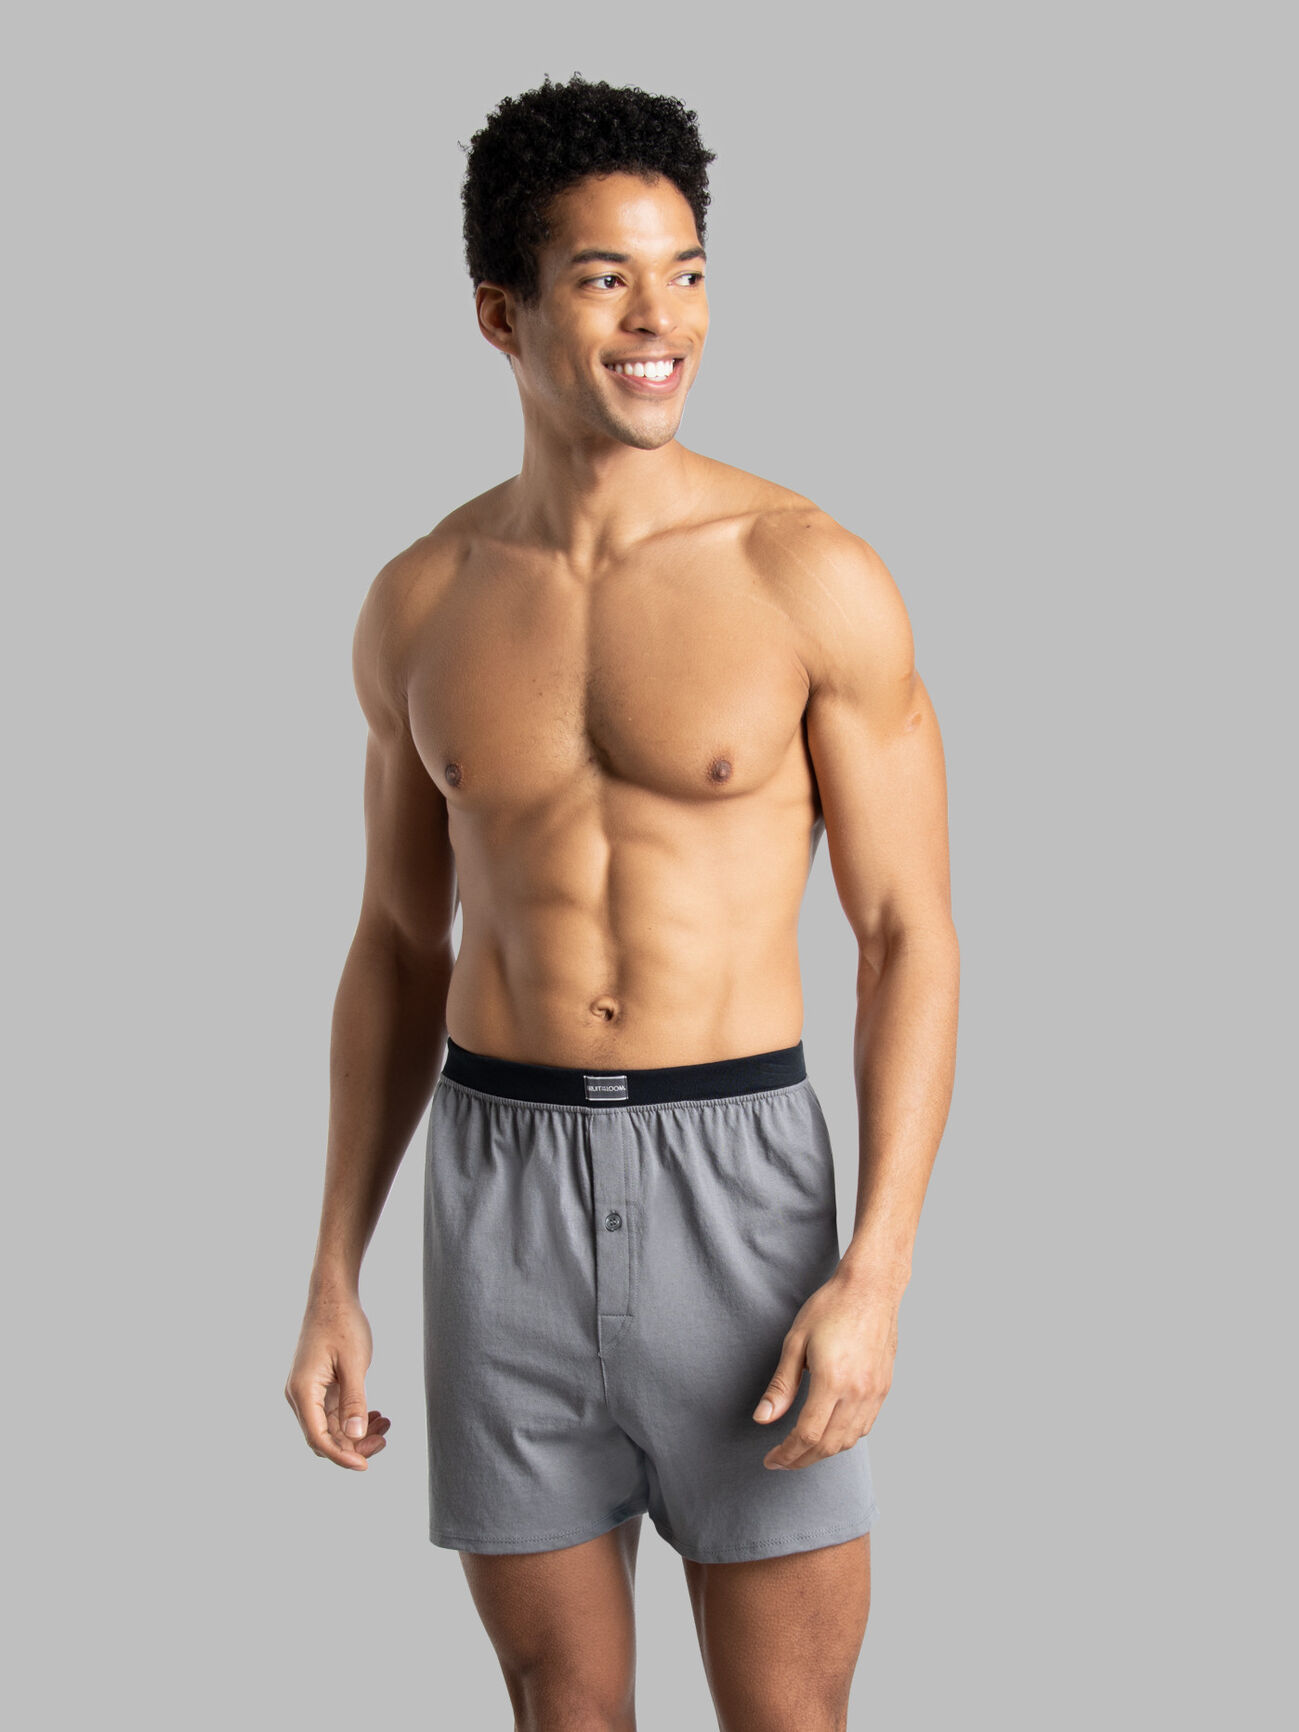 Men's Knit Boxers, Assorted 6 Pack